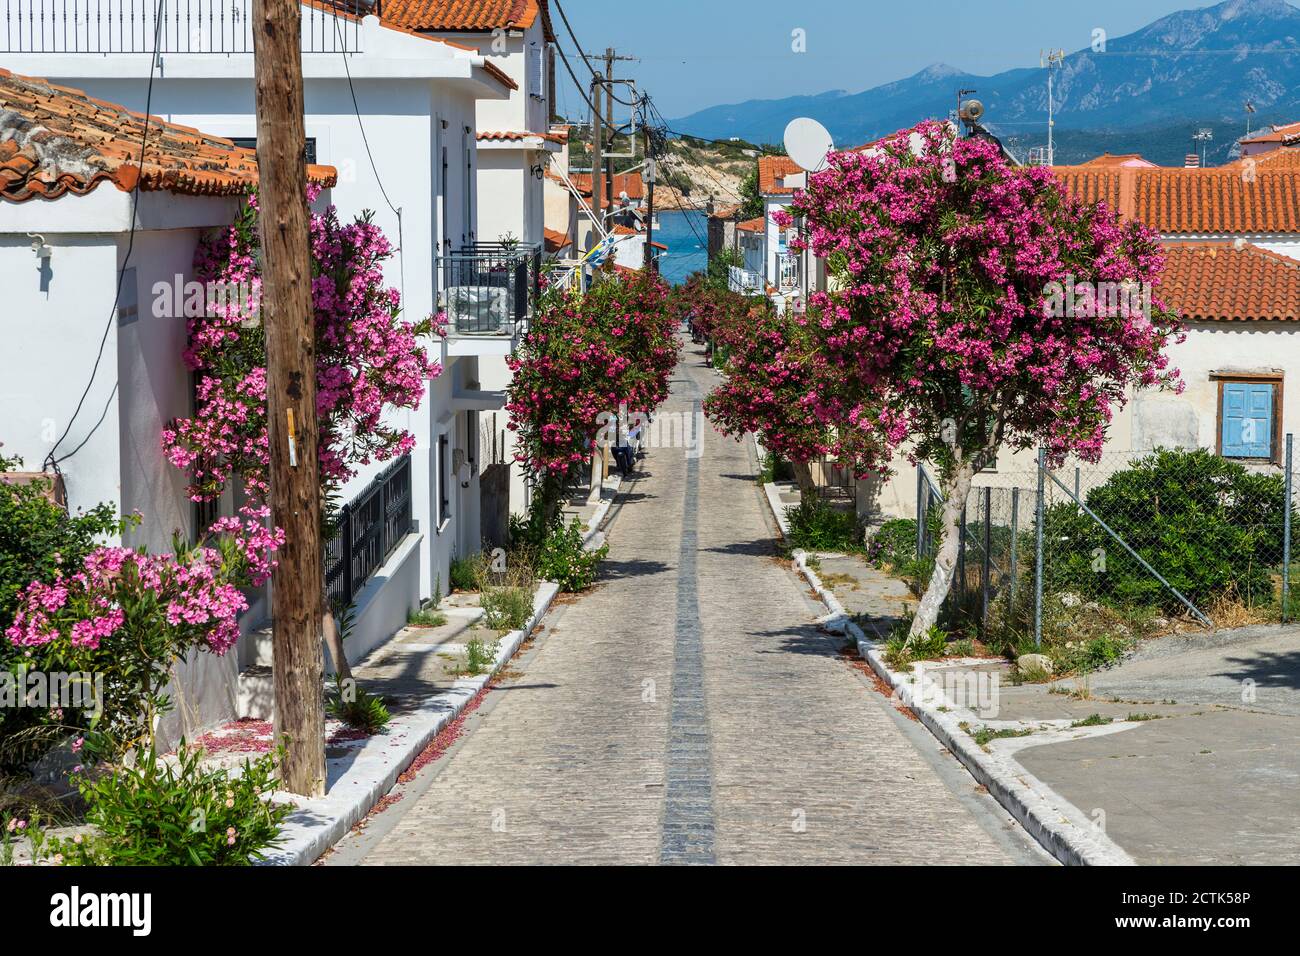 Greece, North Aegean, Pythagoreio, Houses and pink blossoming trees along cobblestone town street Stock Photo